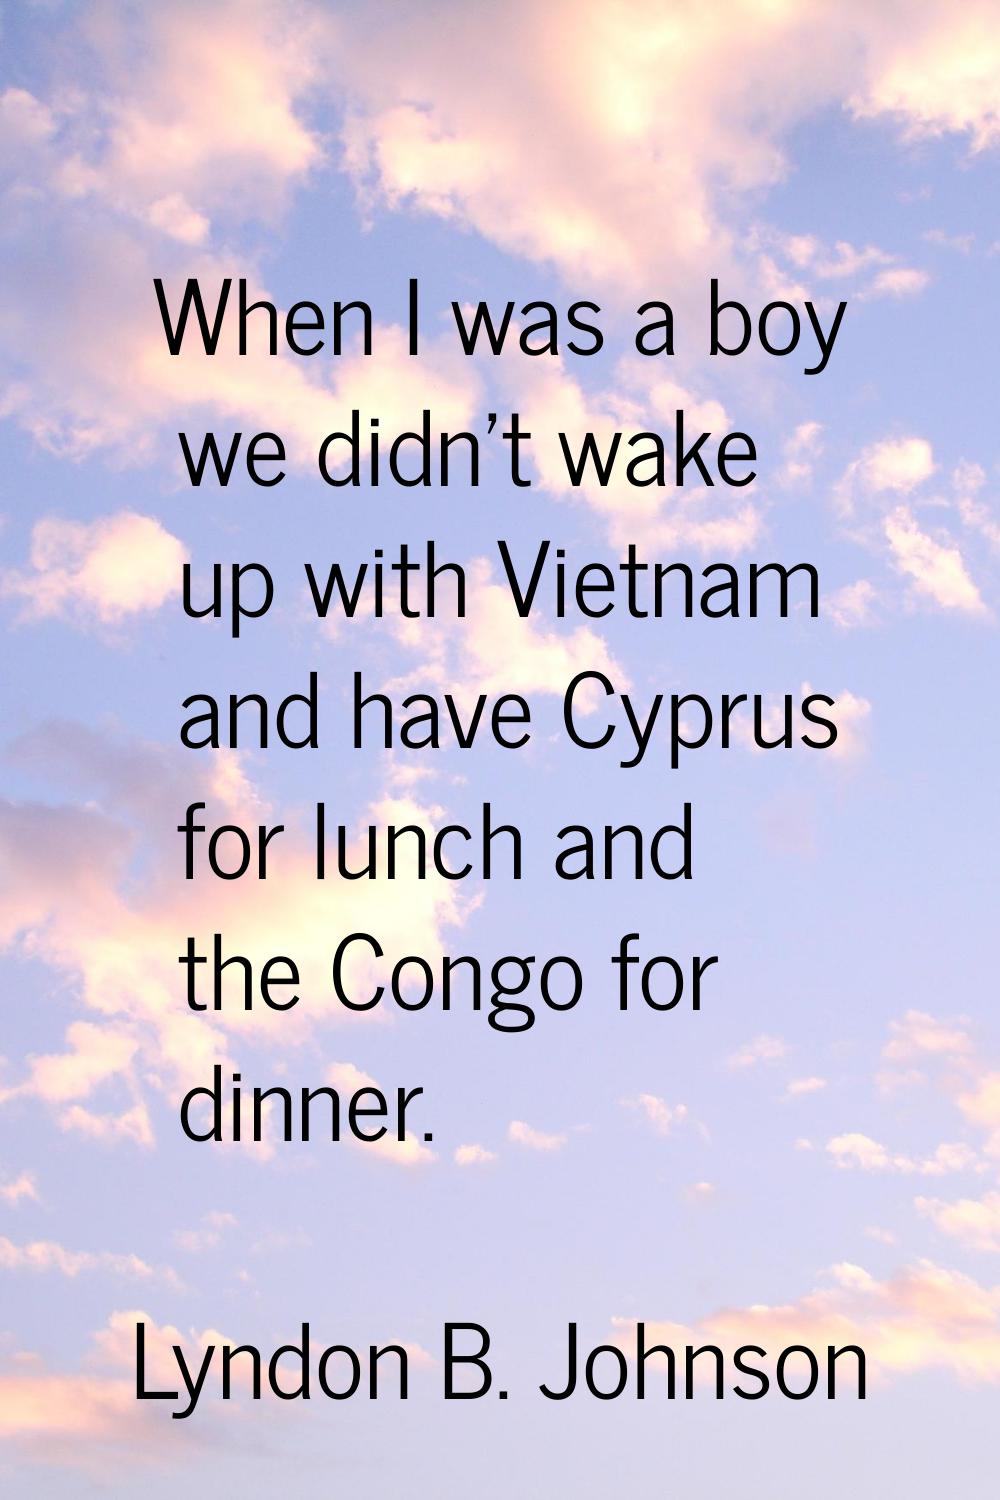 When I was a boy we didn't wake up with Vietnam and have Cyprus for lunch and the Congo for dinner.